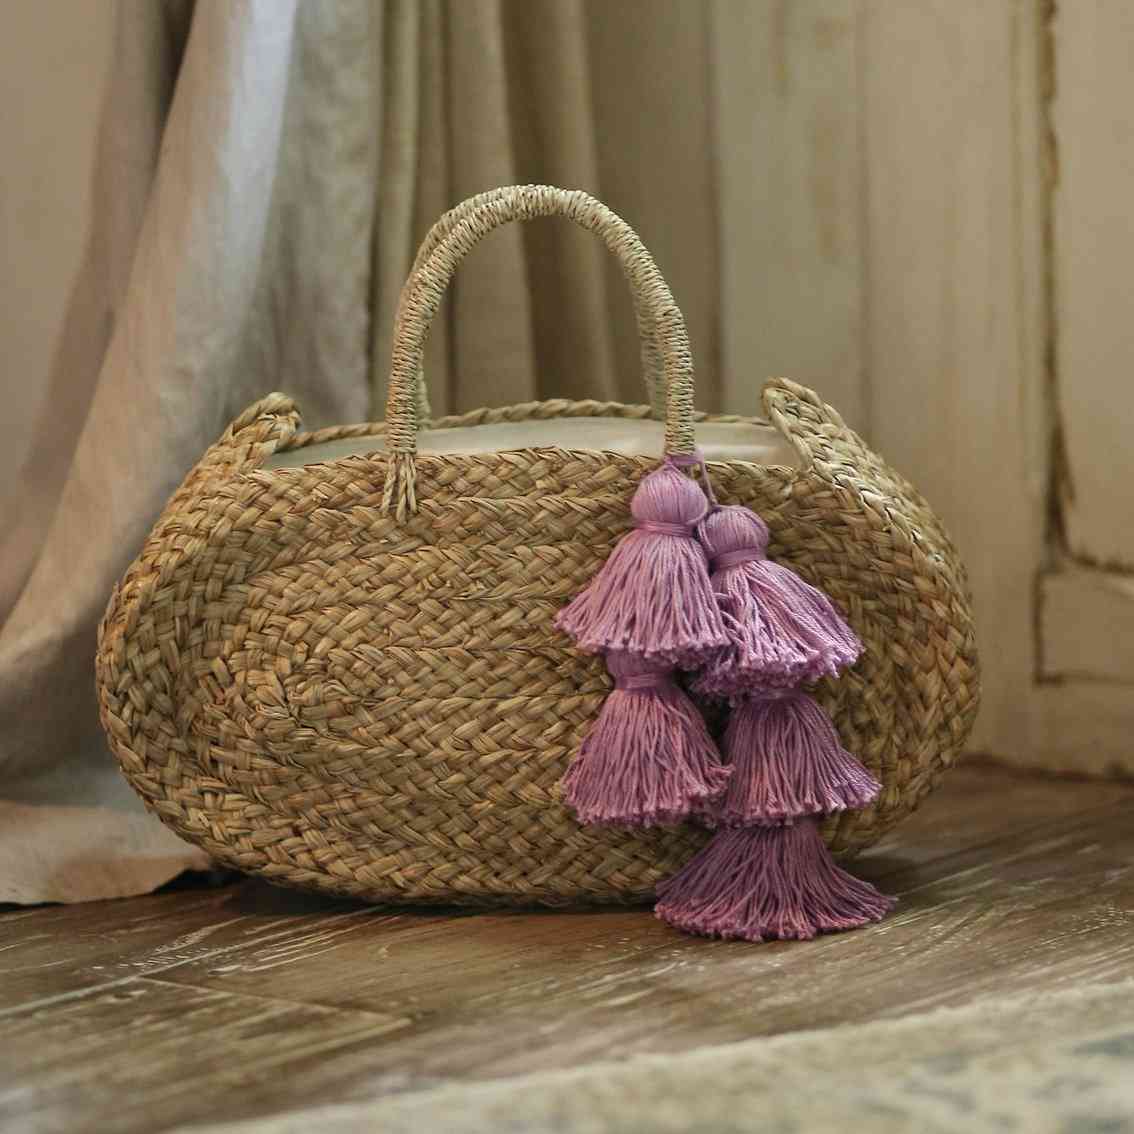 Oval Shaped, Woven Beach Straw Tote Bag With Lavender Tassels